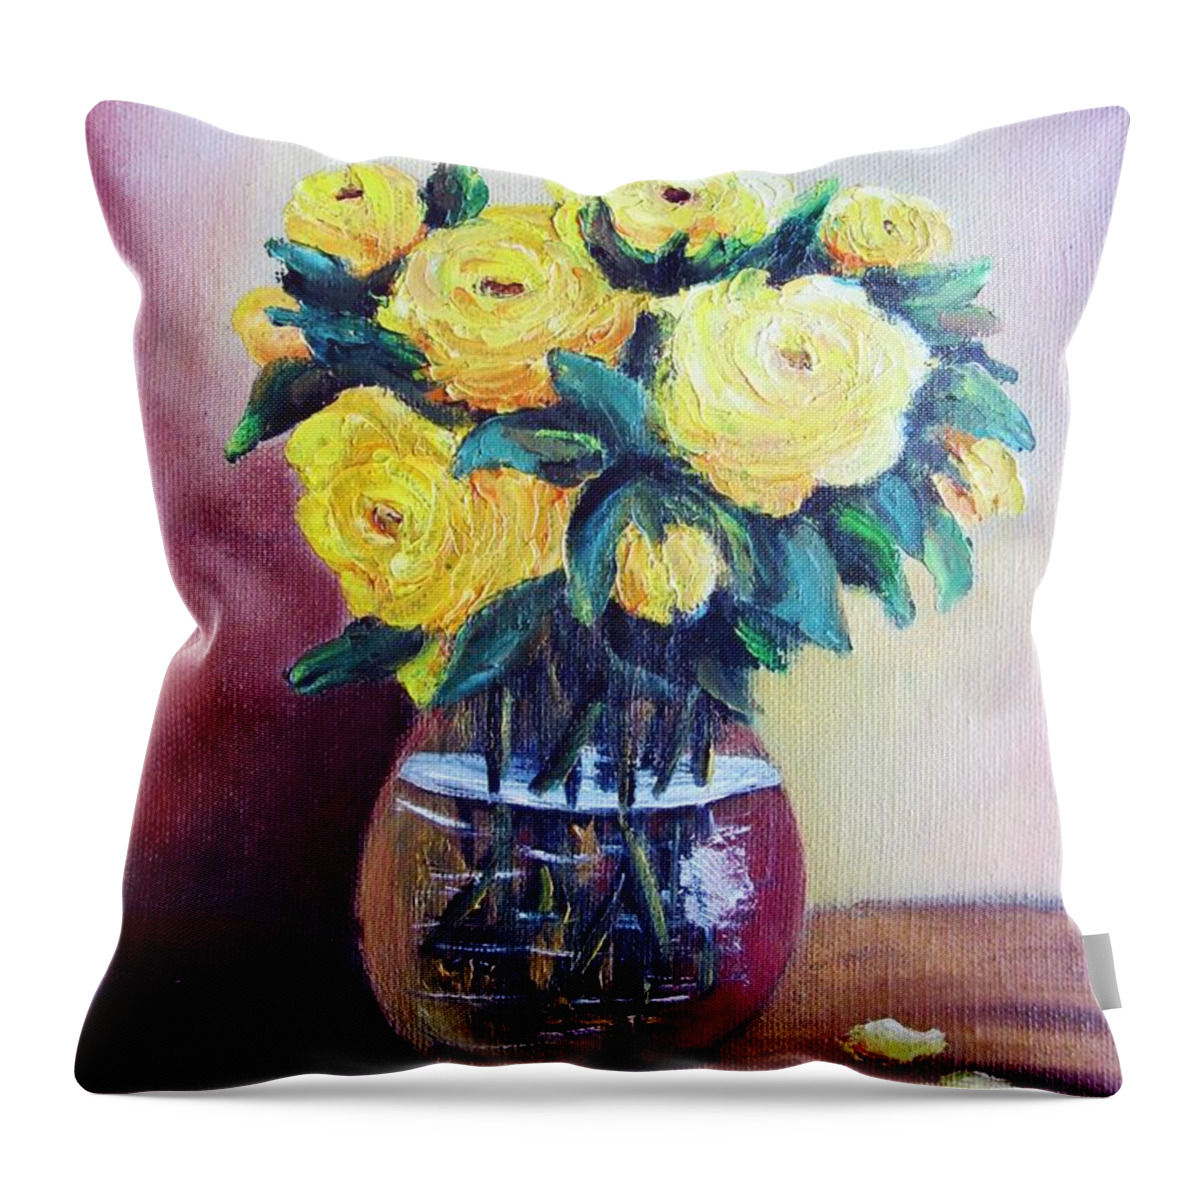 Yellow Throw Pillow featuring the painting Yellow Roses by Vesna Martinjak